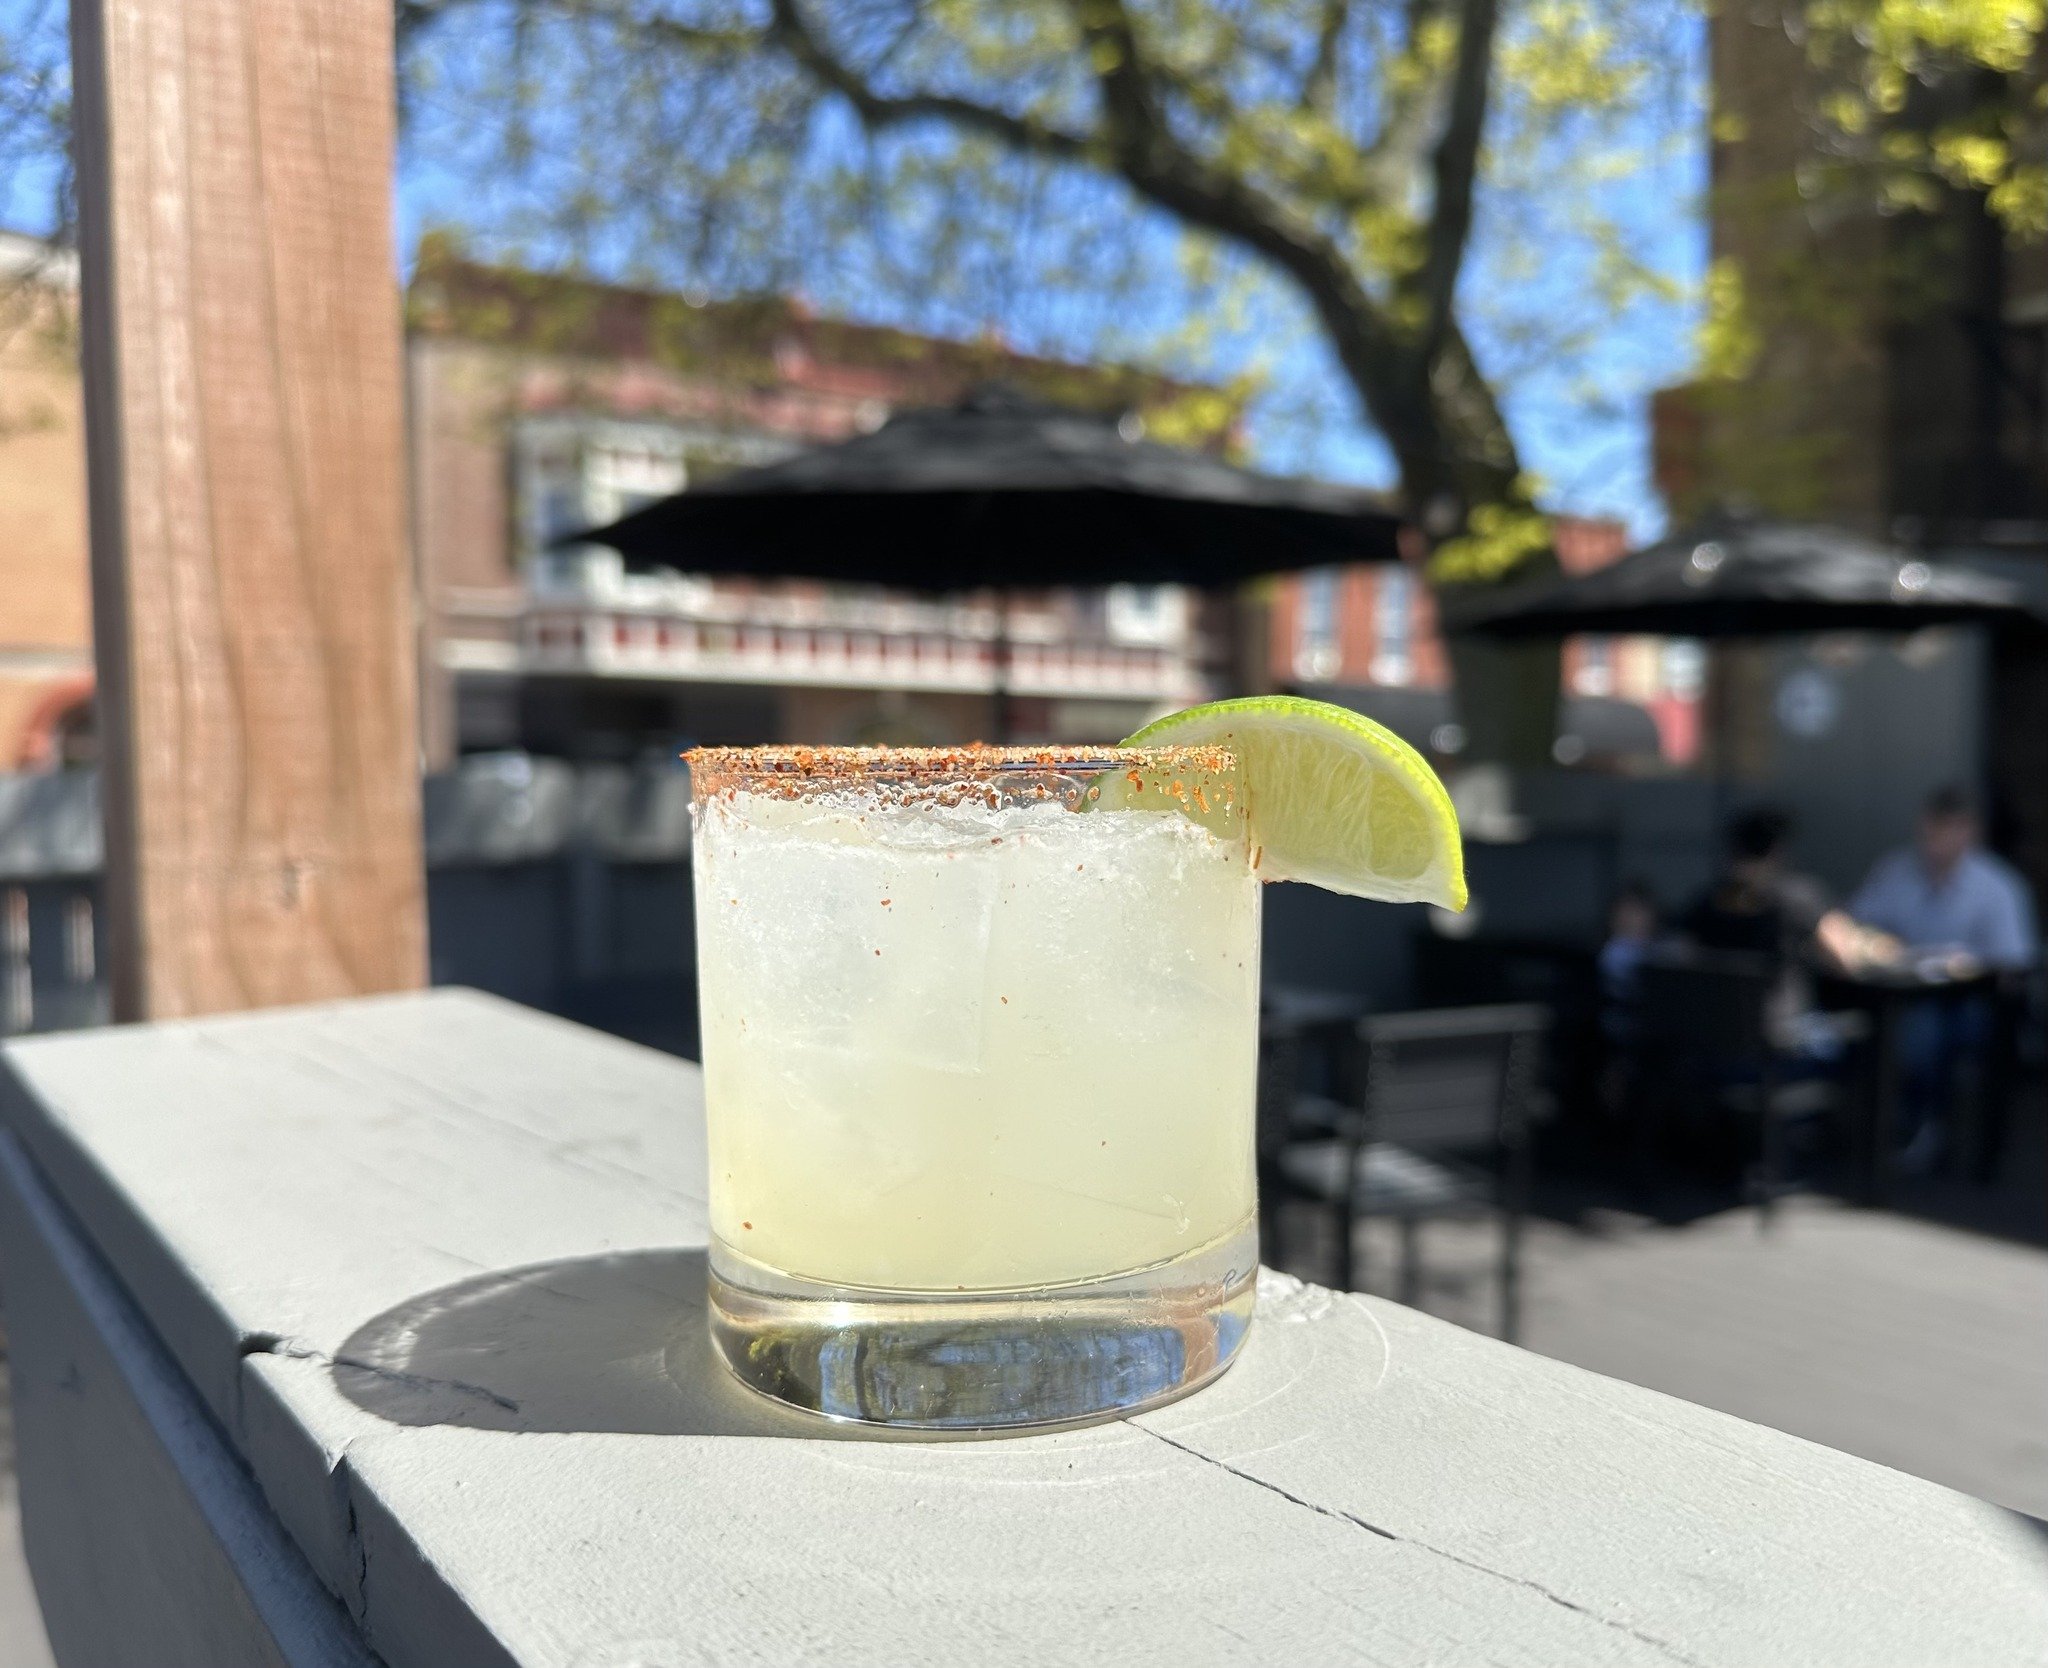 Our patio is open and the Rita Rita's are flowing!! It's a beautiful day to spend with us at the Alehouse. Bring your friends and grab a Modelo pitcher for $10! See you soon!